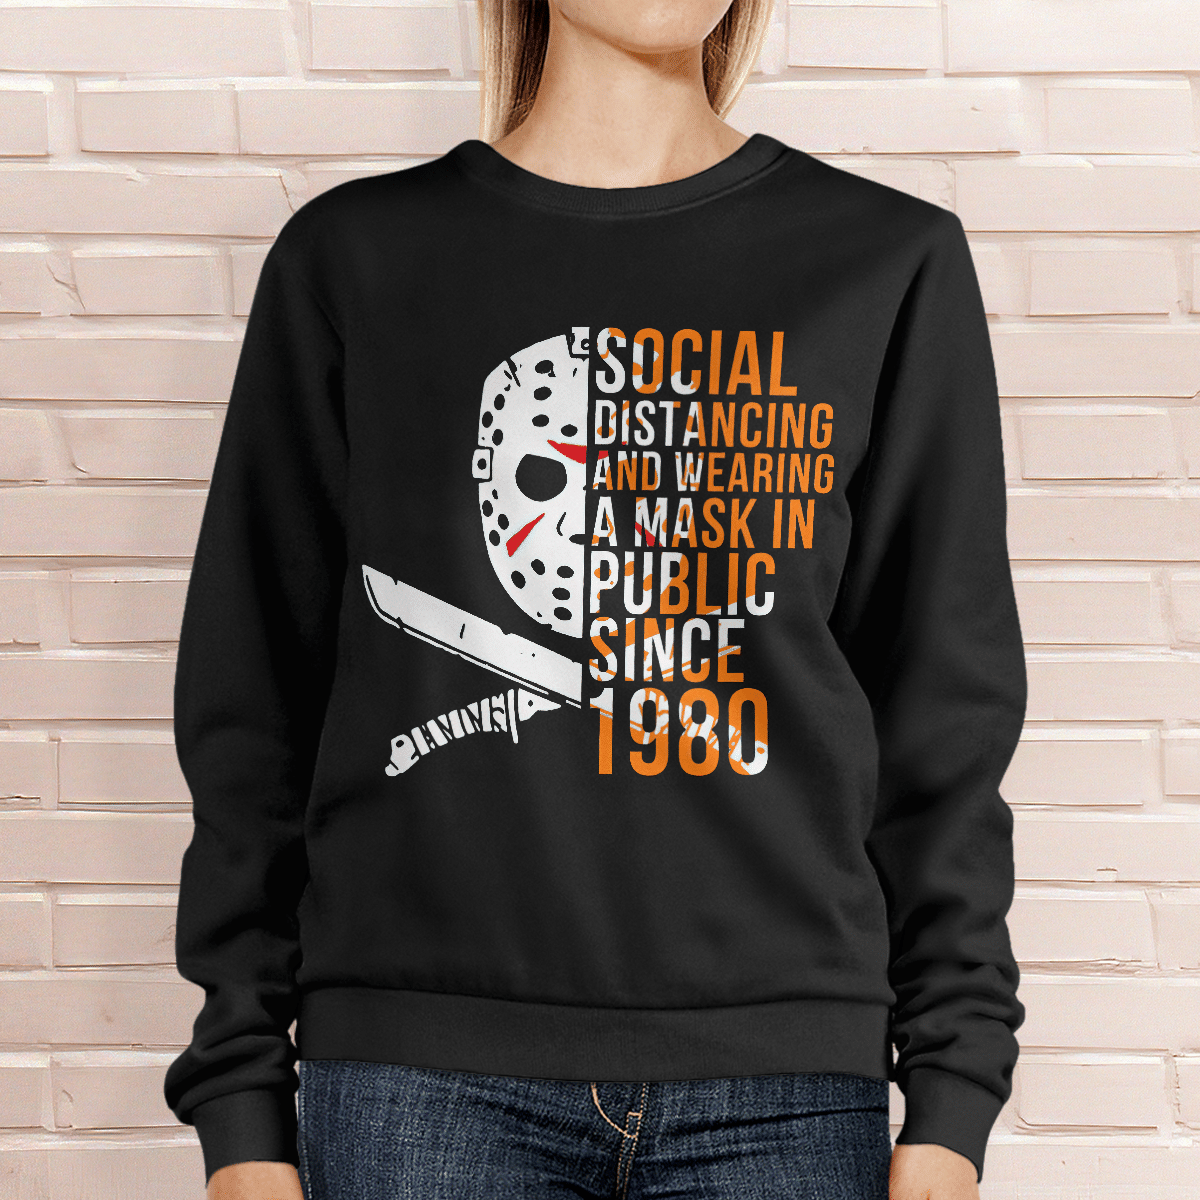 Social distancing and wearing a mask in public since 1980 Jason Voorhees shirt hoodie 3